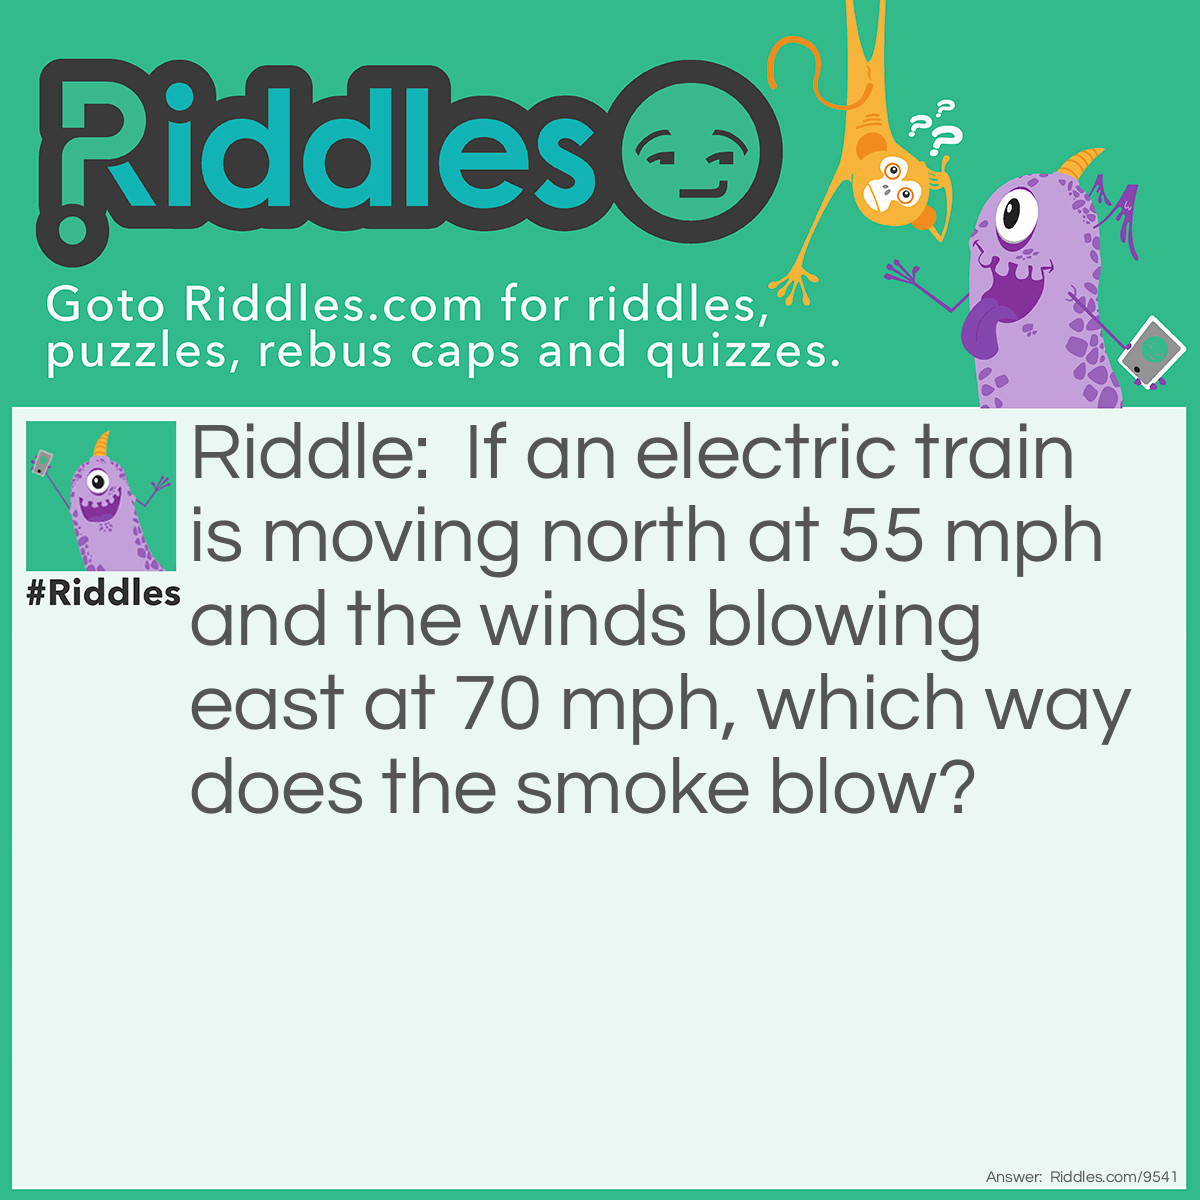 Riddle: If an electric train is moving north at 55 mph and the winds blowing east at 70 mph, which way does the smoke blow? Answer: An electric train doesn’t emit smoke.